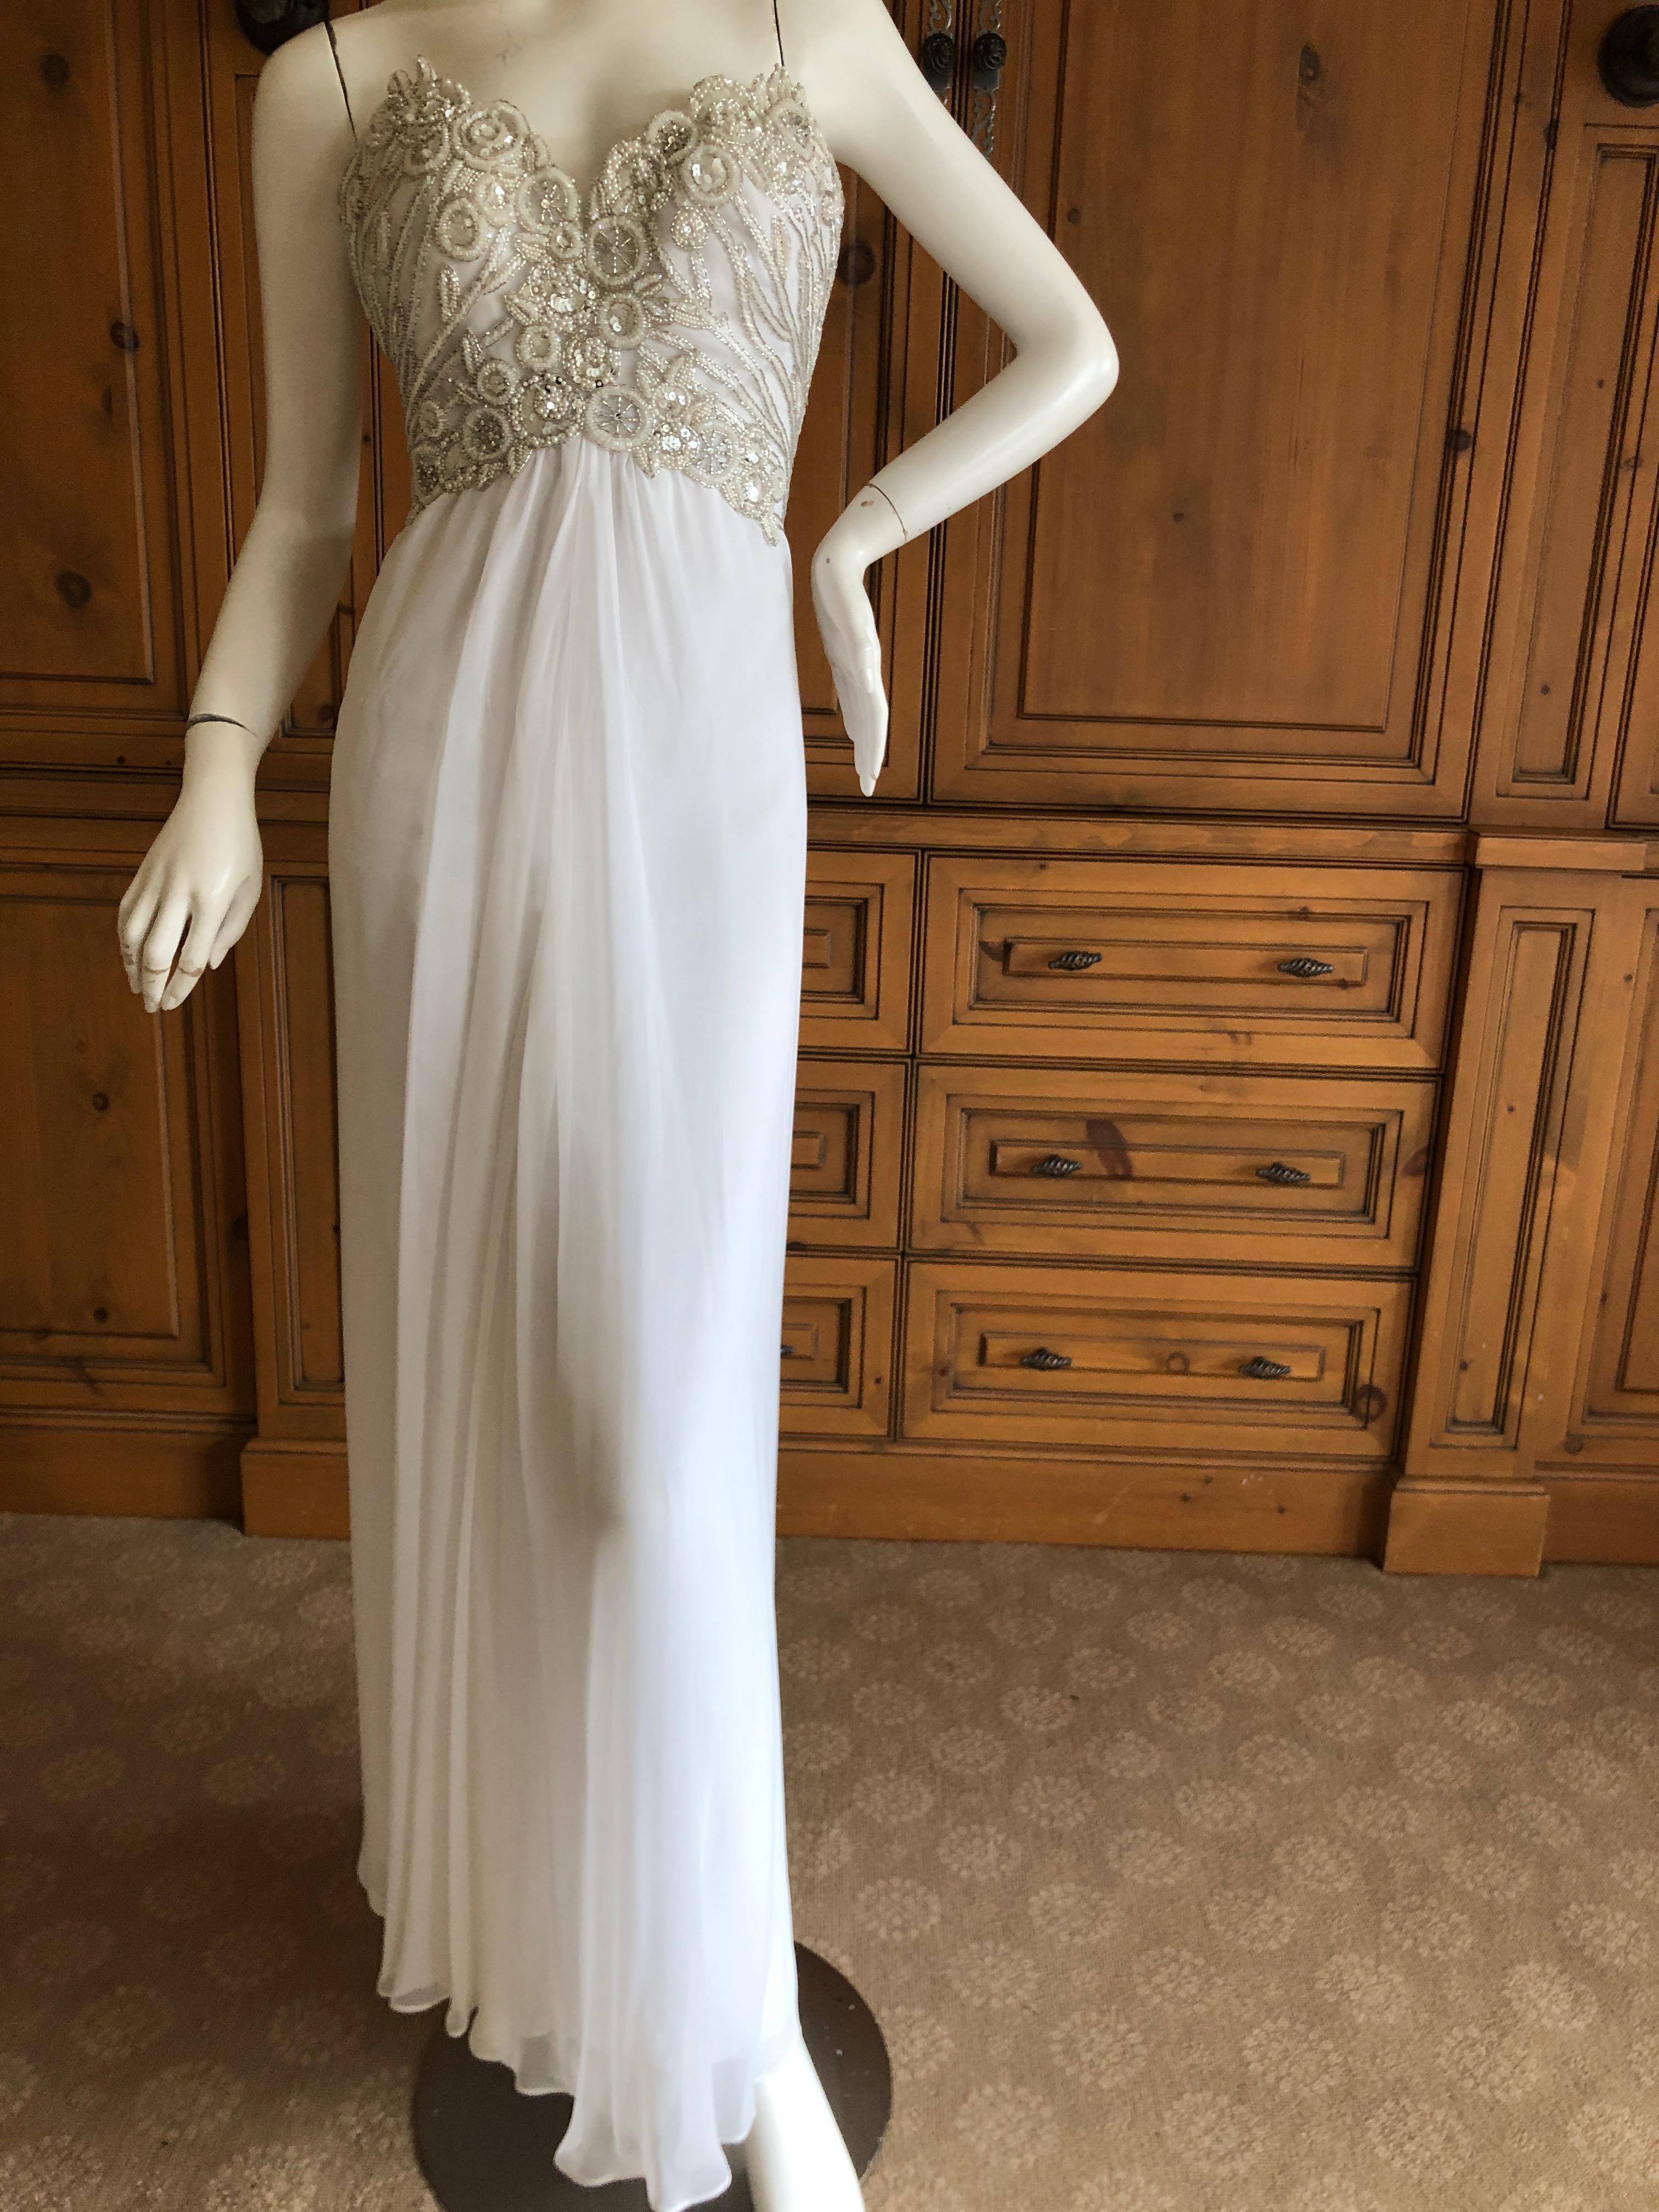 Bob Mackie Vintage Ivory Evening Gown with Silver Beaded Bodice and Shawl.
Ivory with silver bead accents, with clear crystals
So much prettier than the photos, please use zoom feature to see details.
Size 6
Bust 32